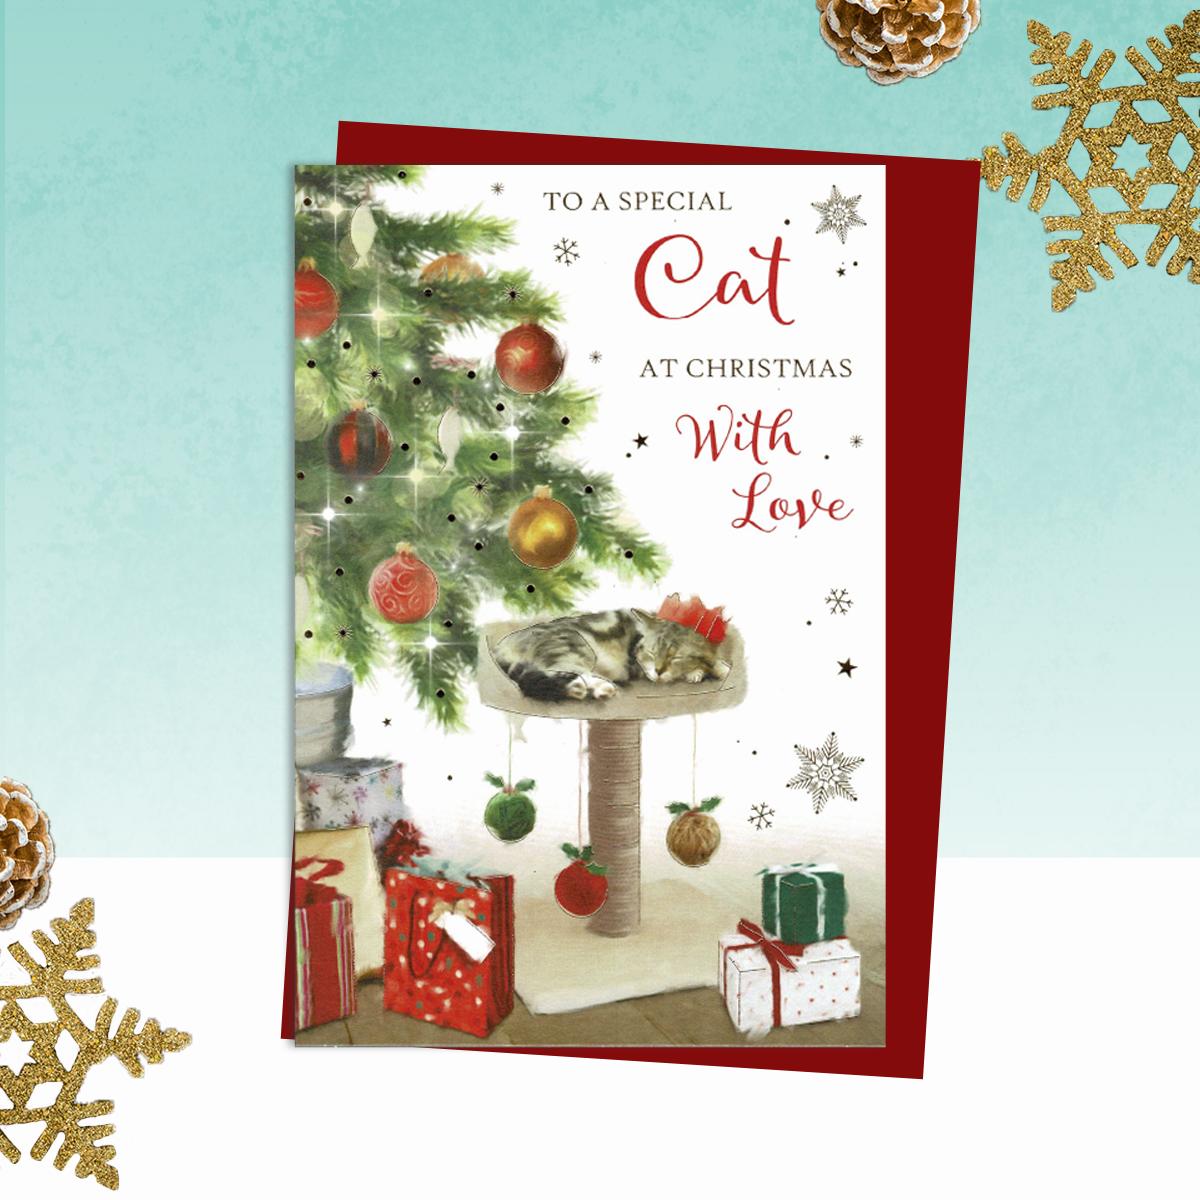 To A Special Cat Christmas Card Alongside Its Red Envelope